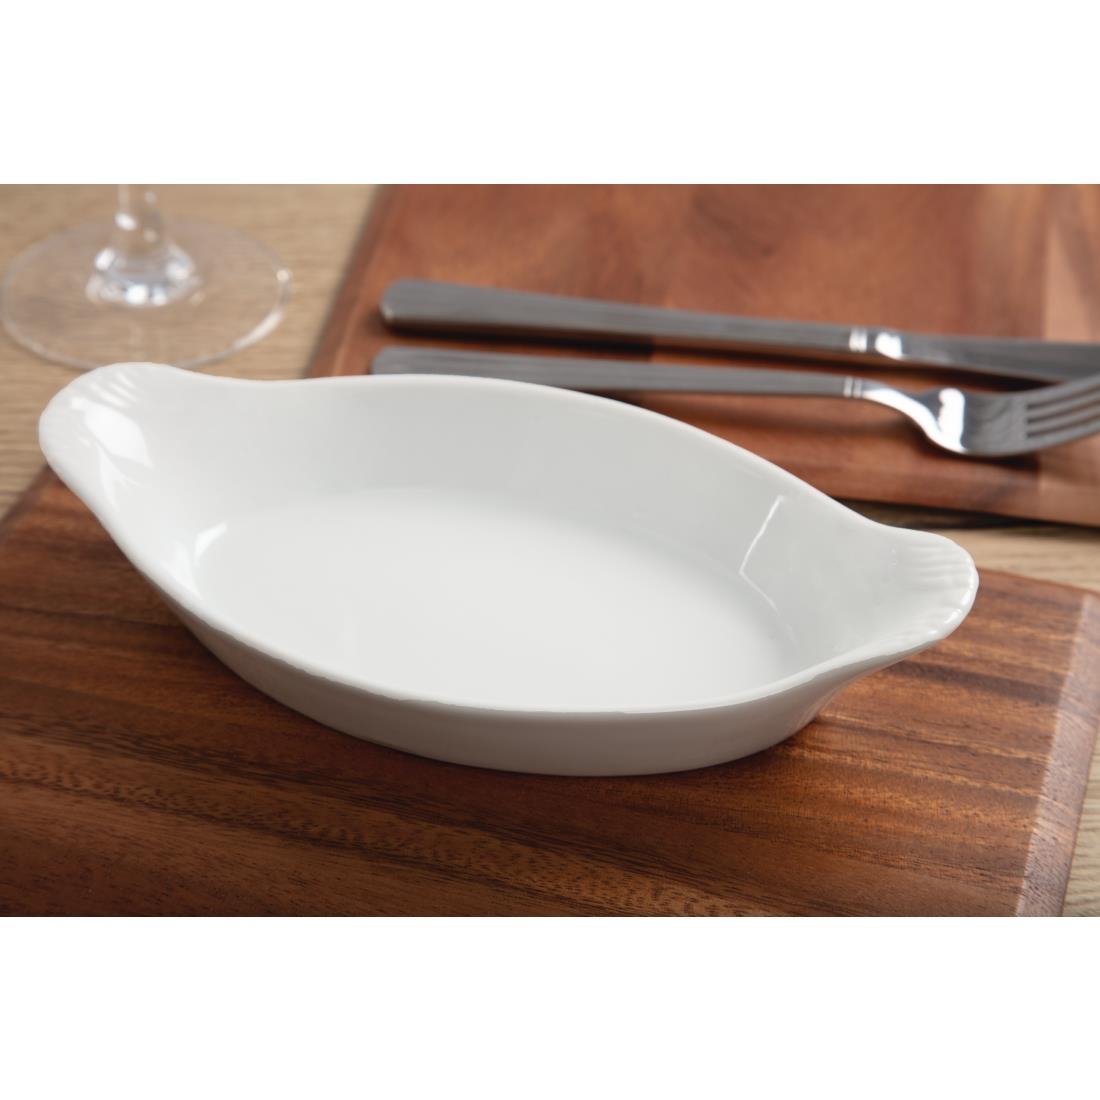 Olympia Whiteware Oval Eared Dishes 204mm (Pack of 6) - W441  - 5